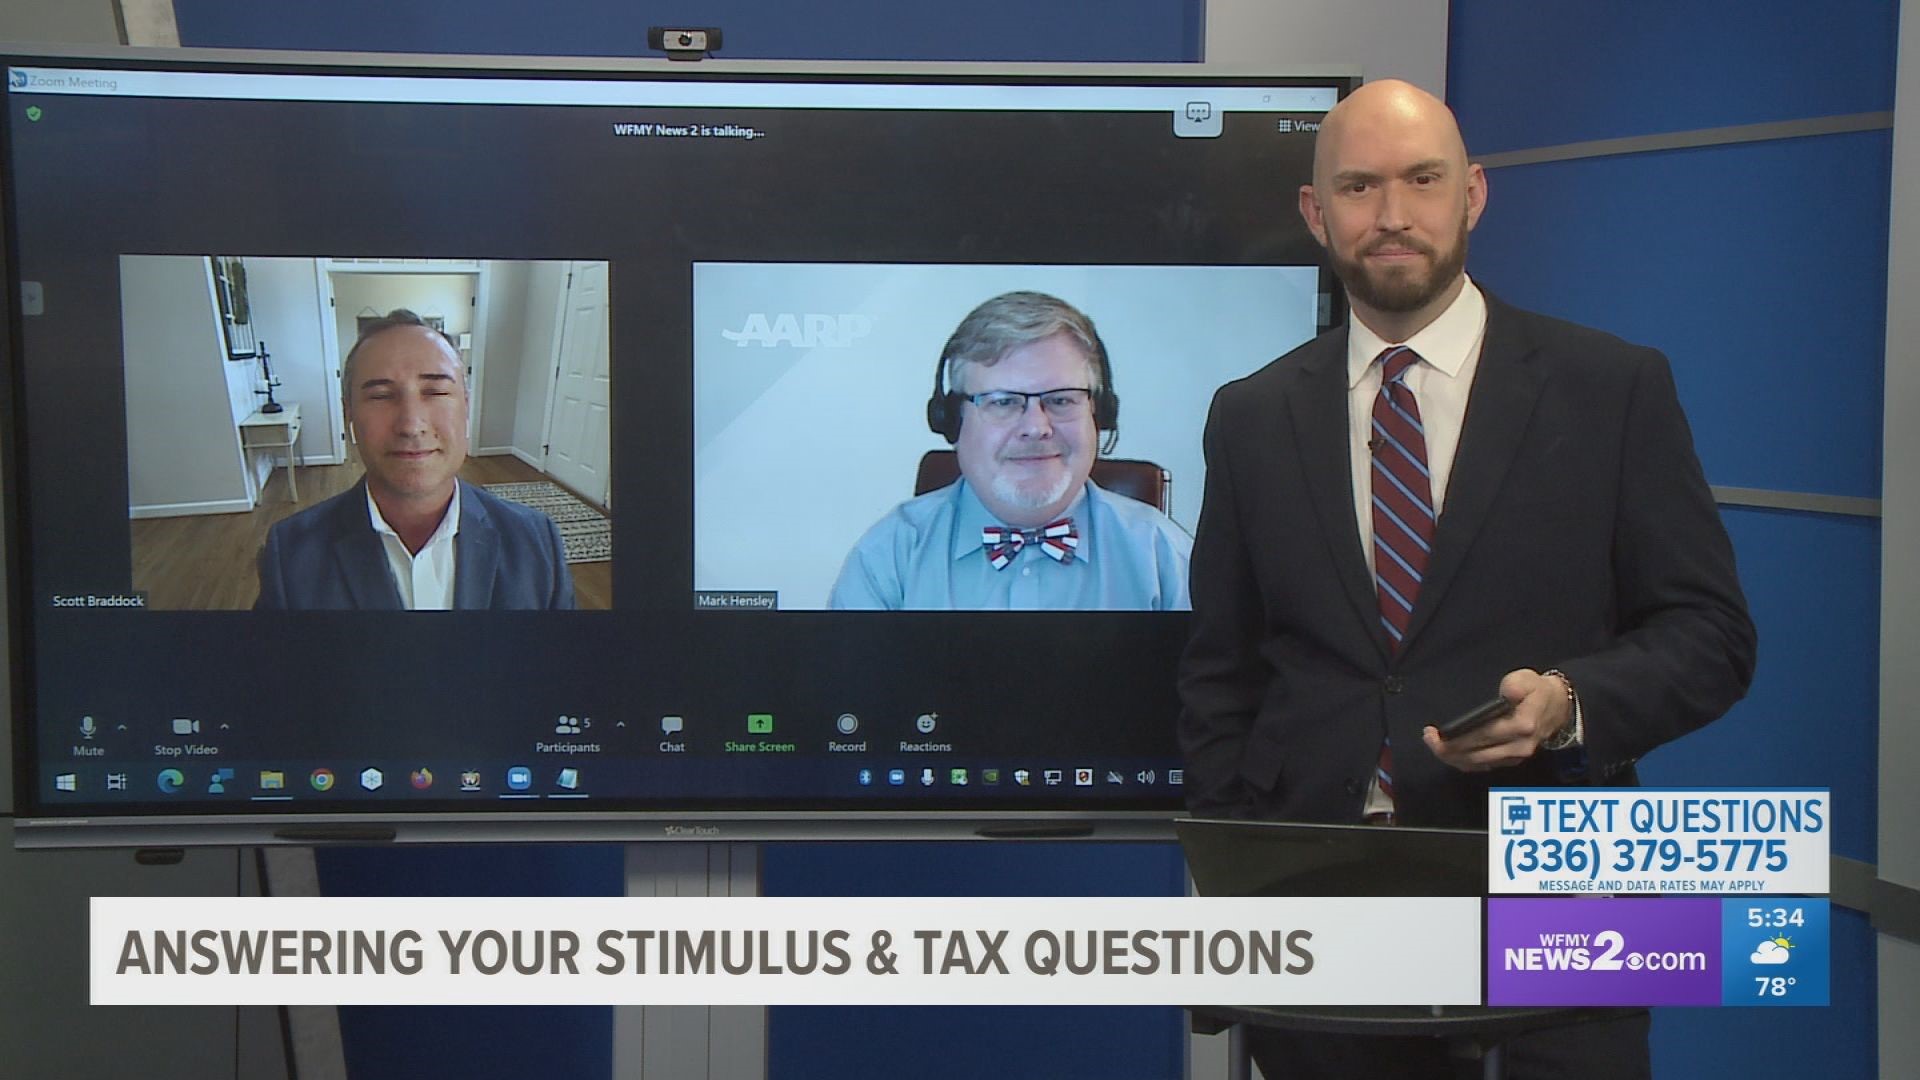 Experts explain how parents can claim their child tax credits or stimulus payments after the tax filing deadline has passed.